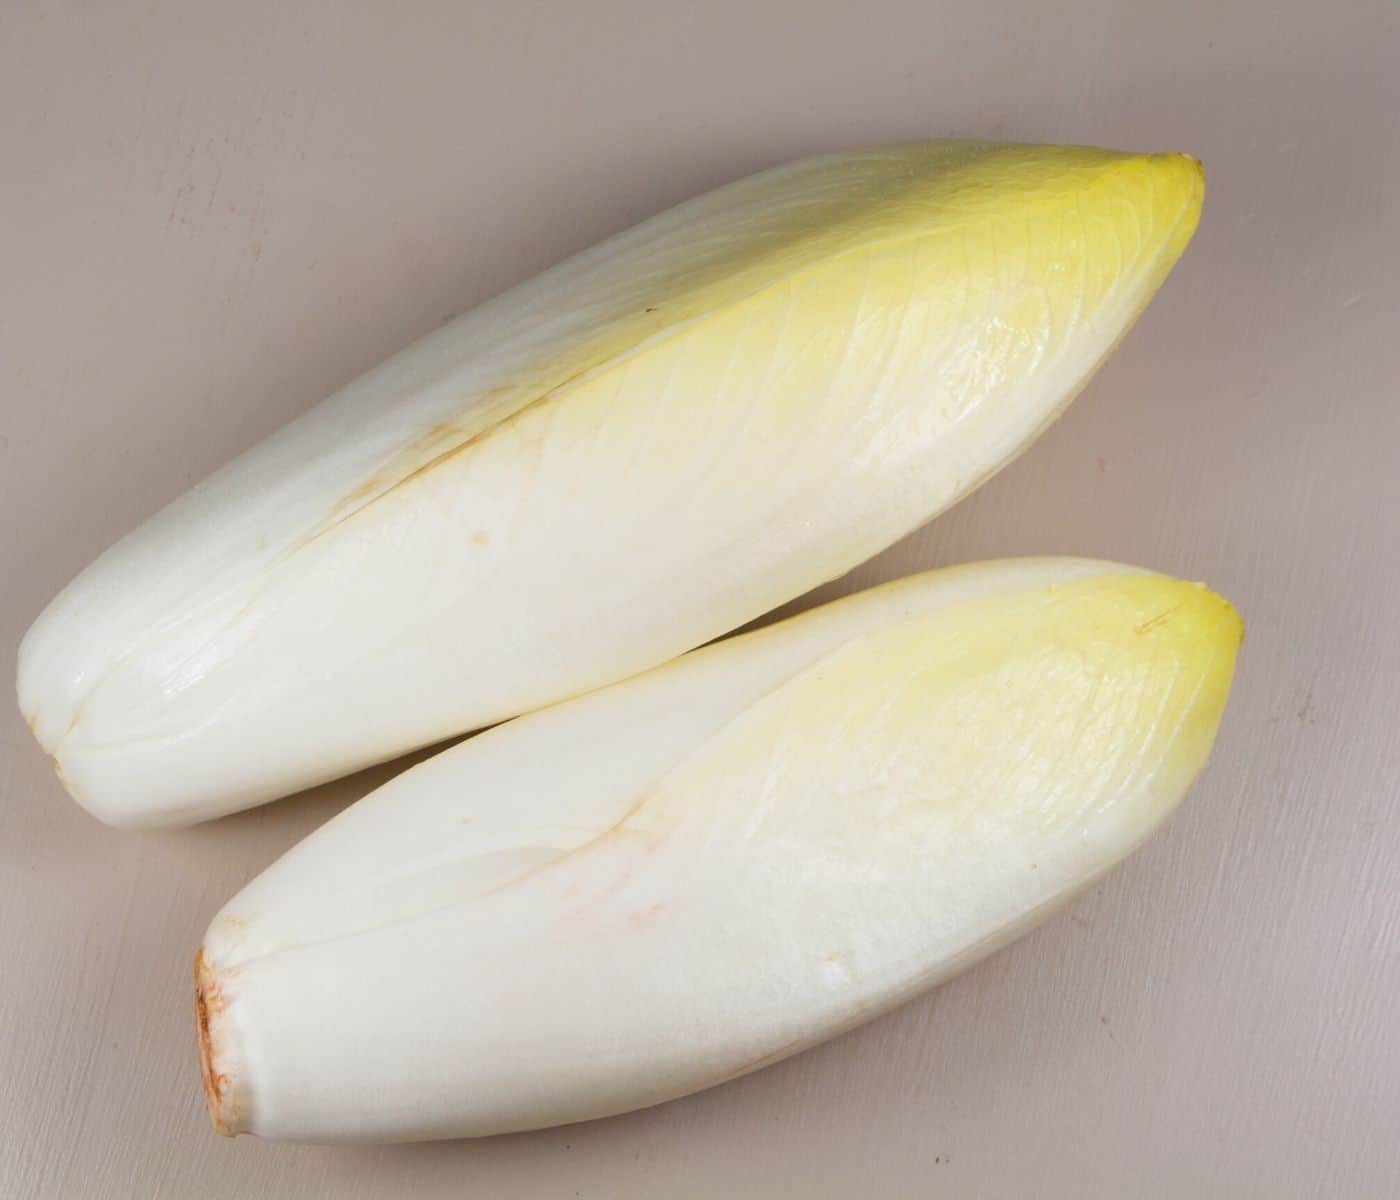 Two endive heads.